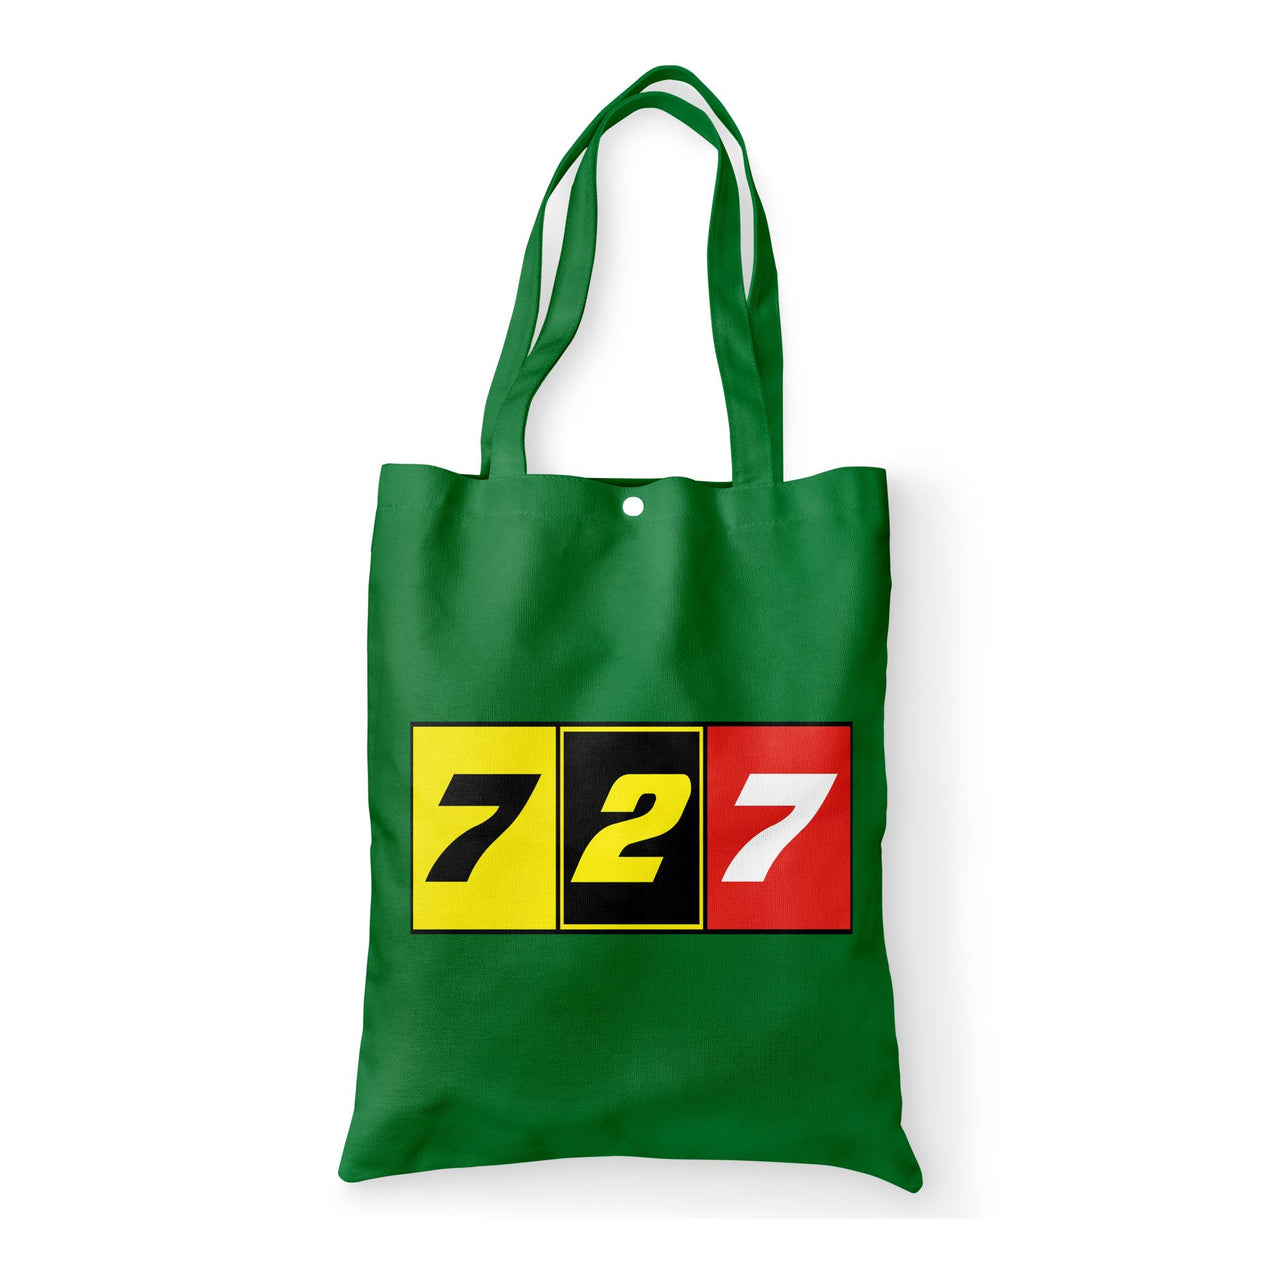 Flat Colourful 727 Designed Tote Bags